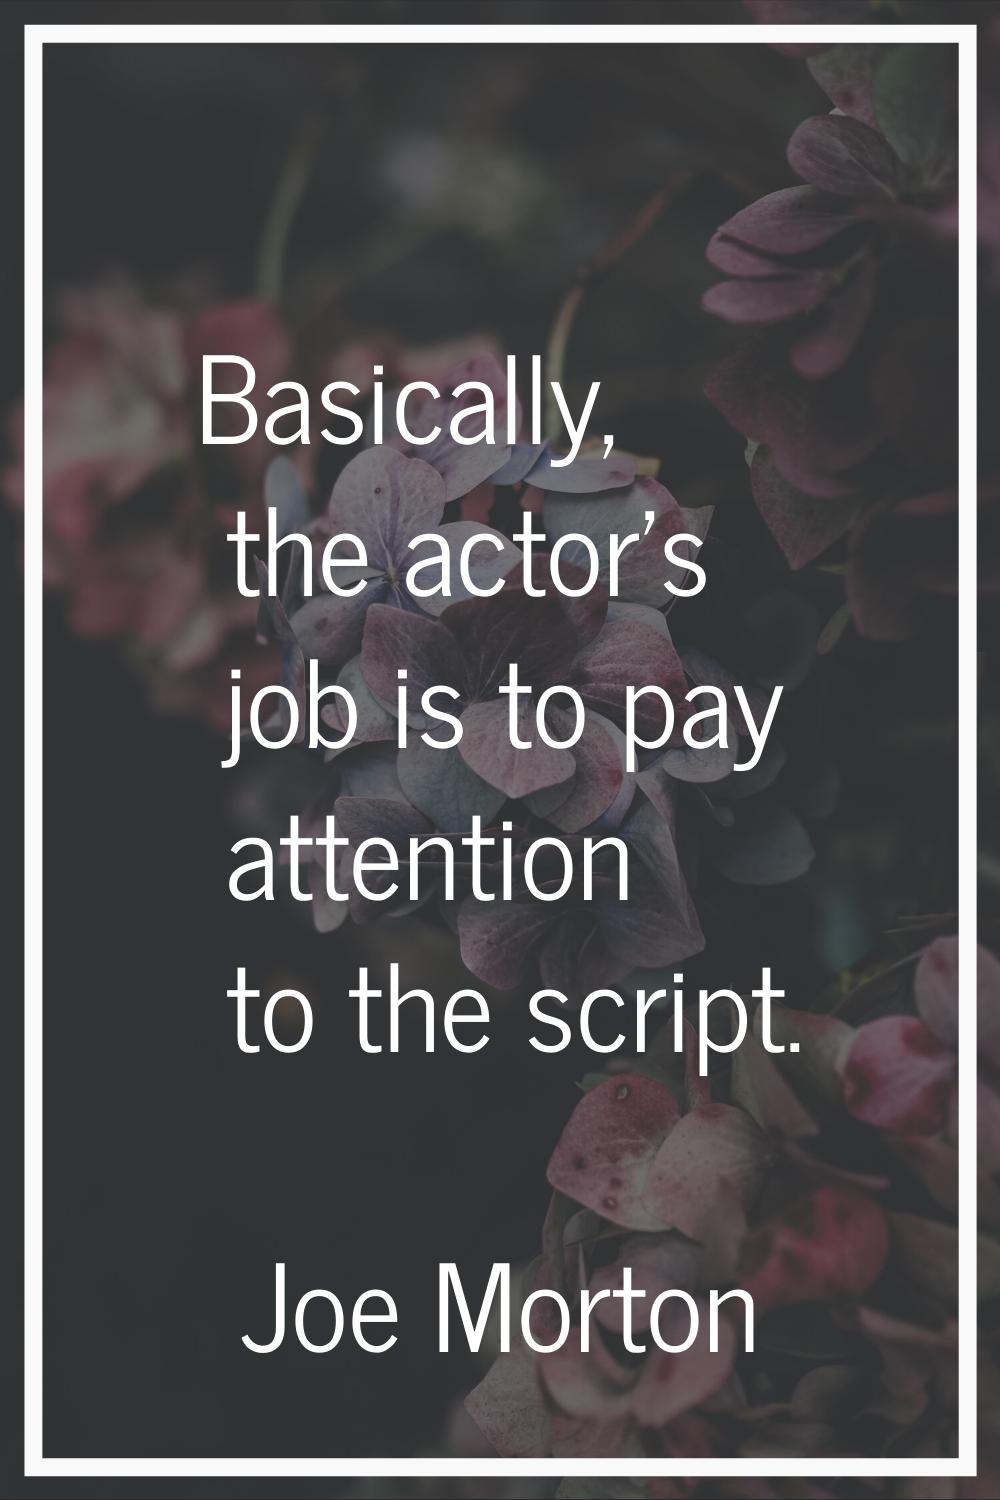 Basically, the actor's job is to pay attention to the script.